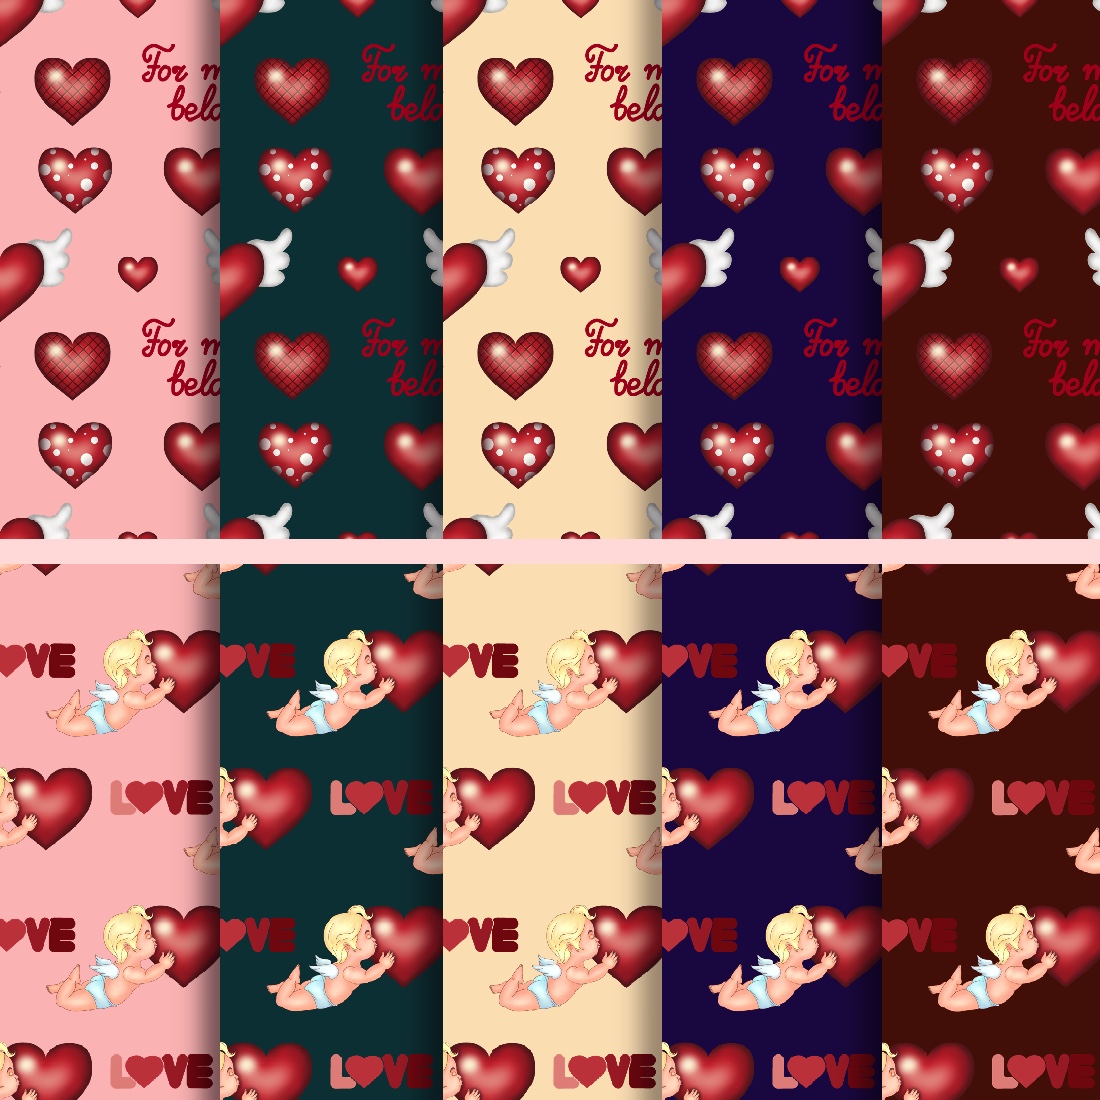 Lovely Colorful Seamless Patterns with Hearts: Valentine's Day.